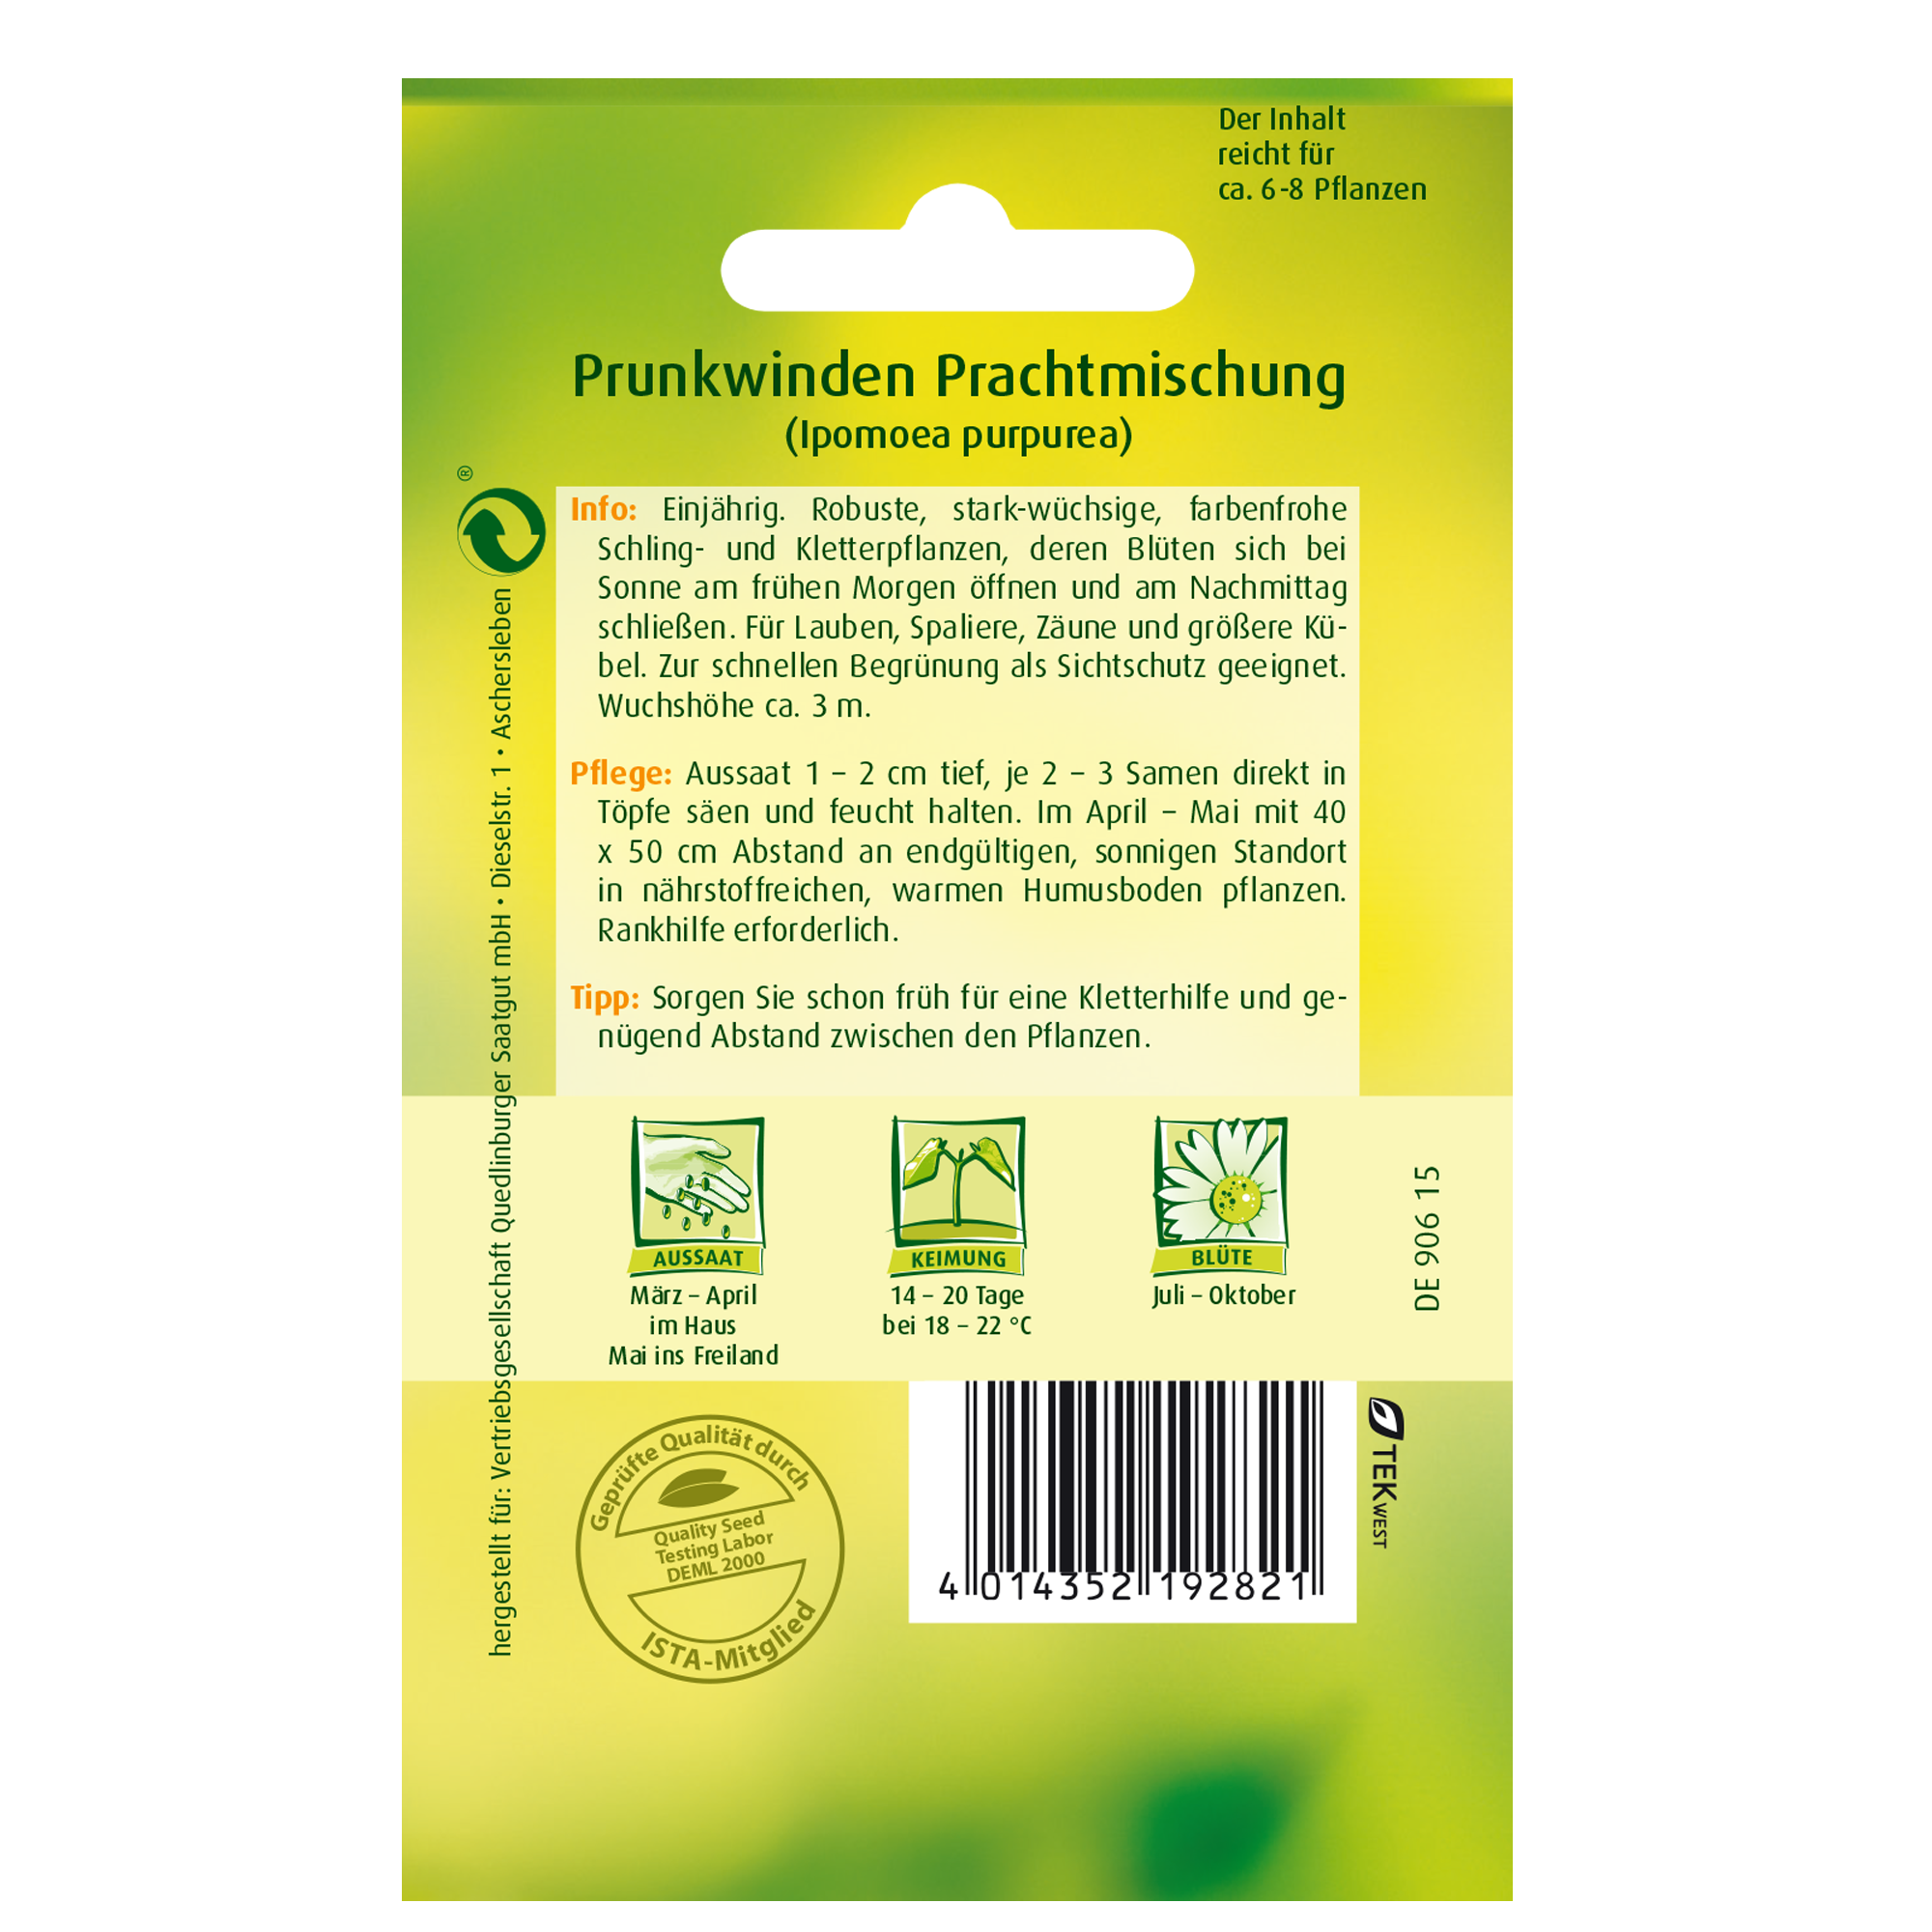 Prunkwinde Prachtmischung + product picture